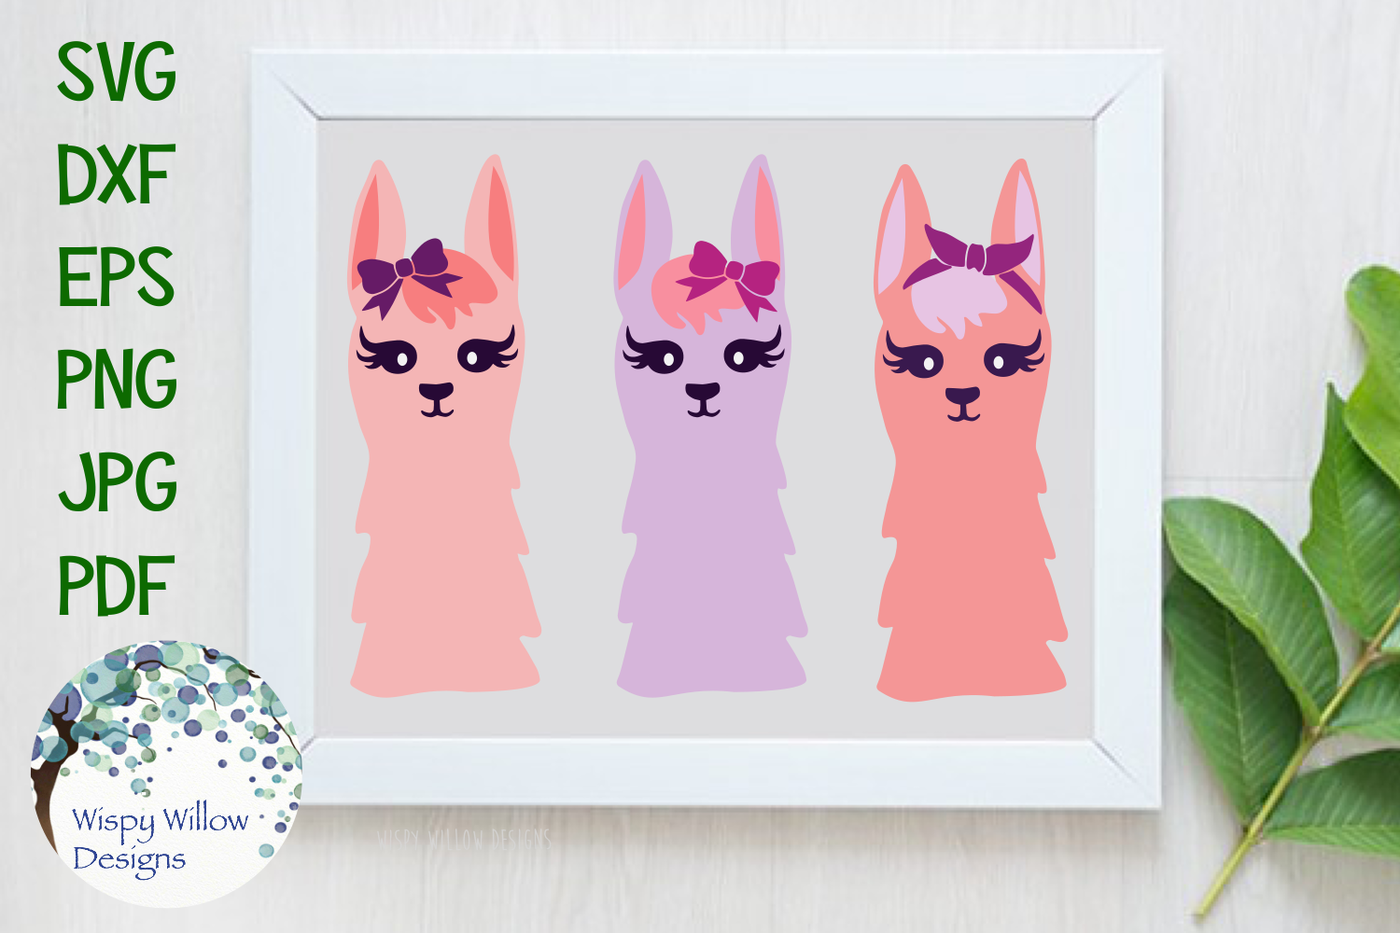 Download Girly Llama Set SVG/DXF/EPS/PNG/JPG/PDF By Wispy Willow ...